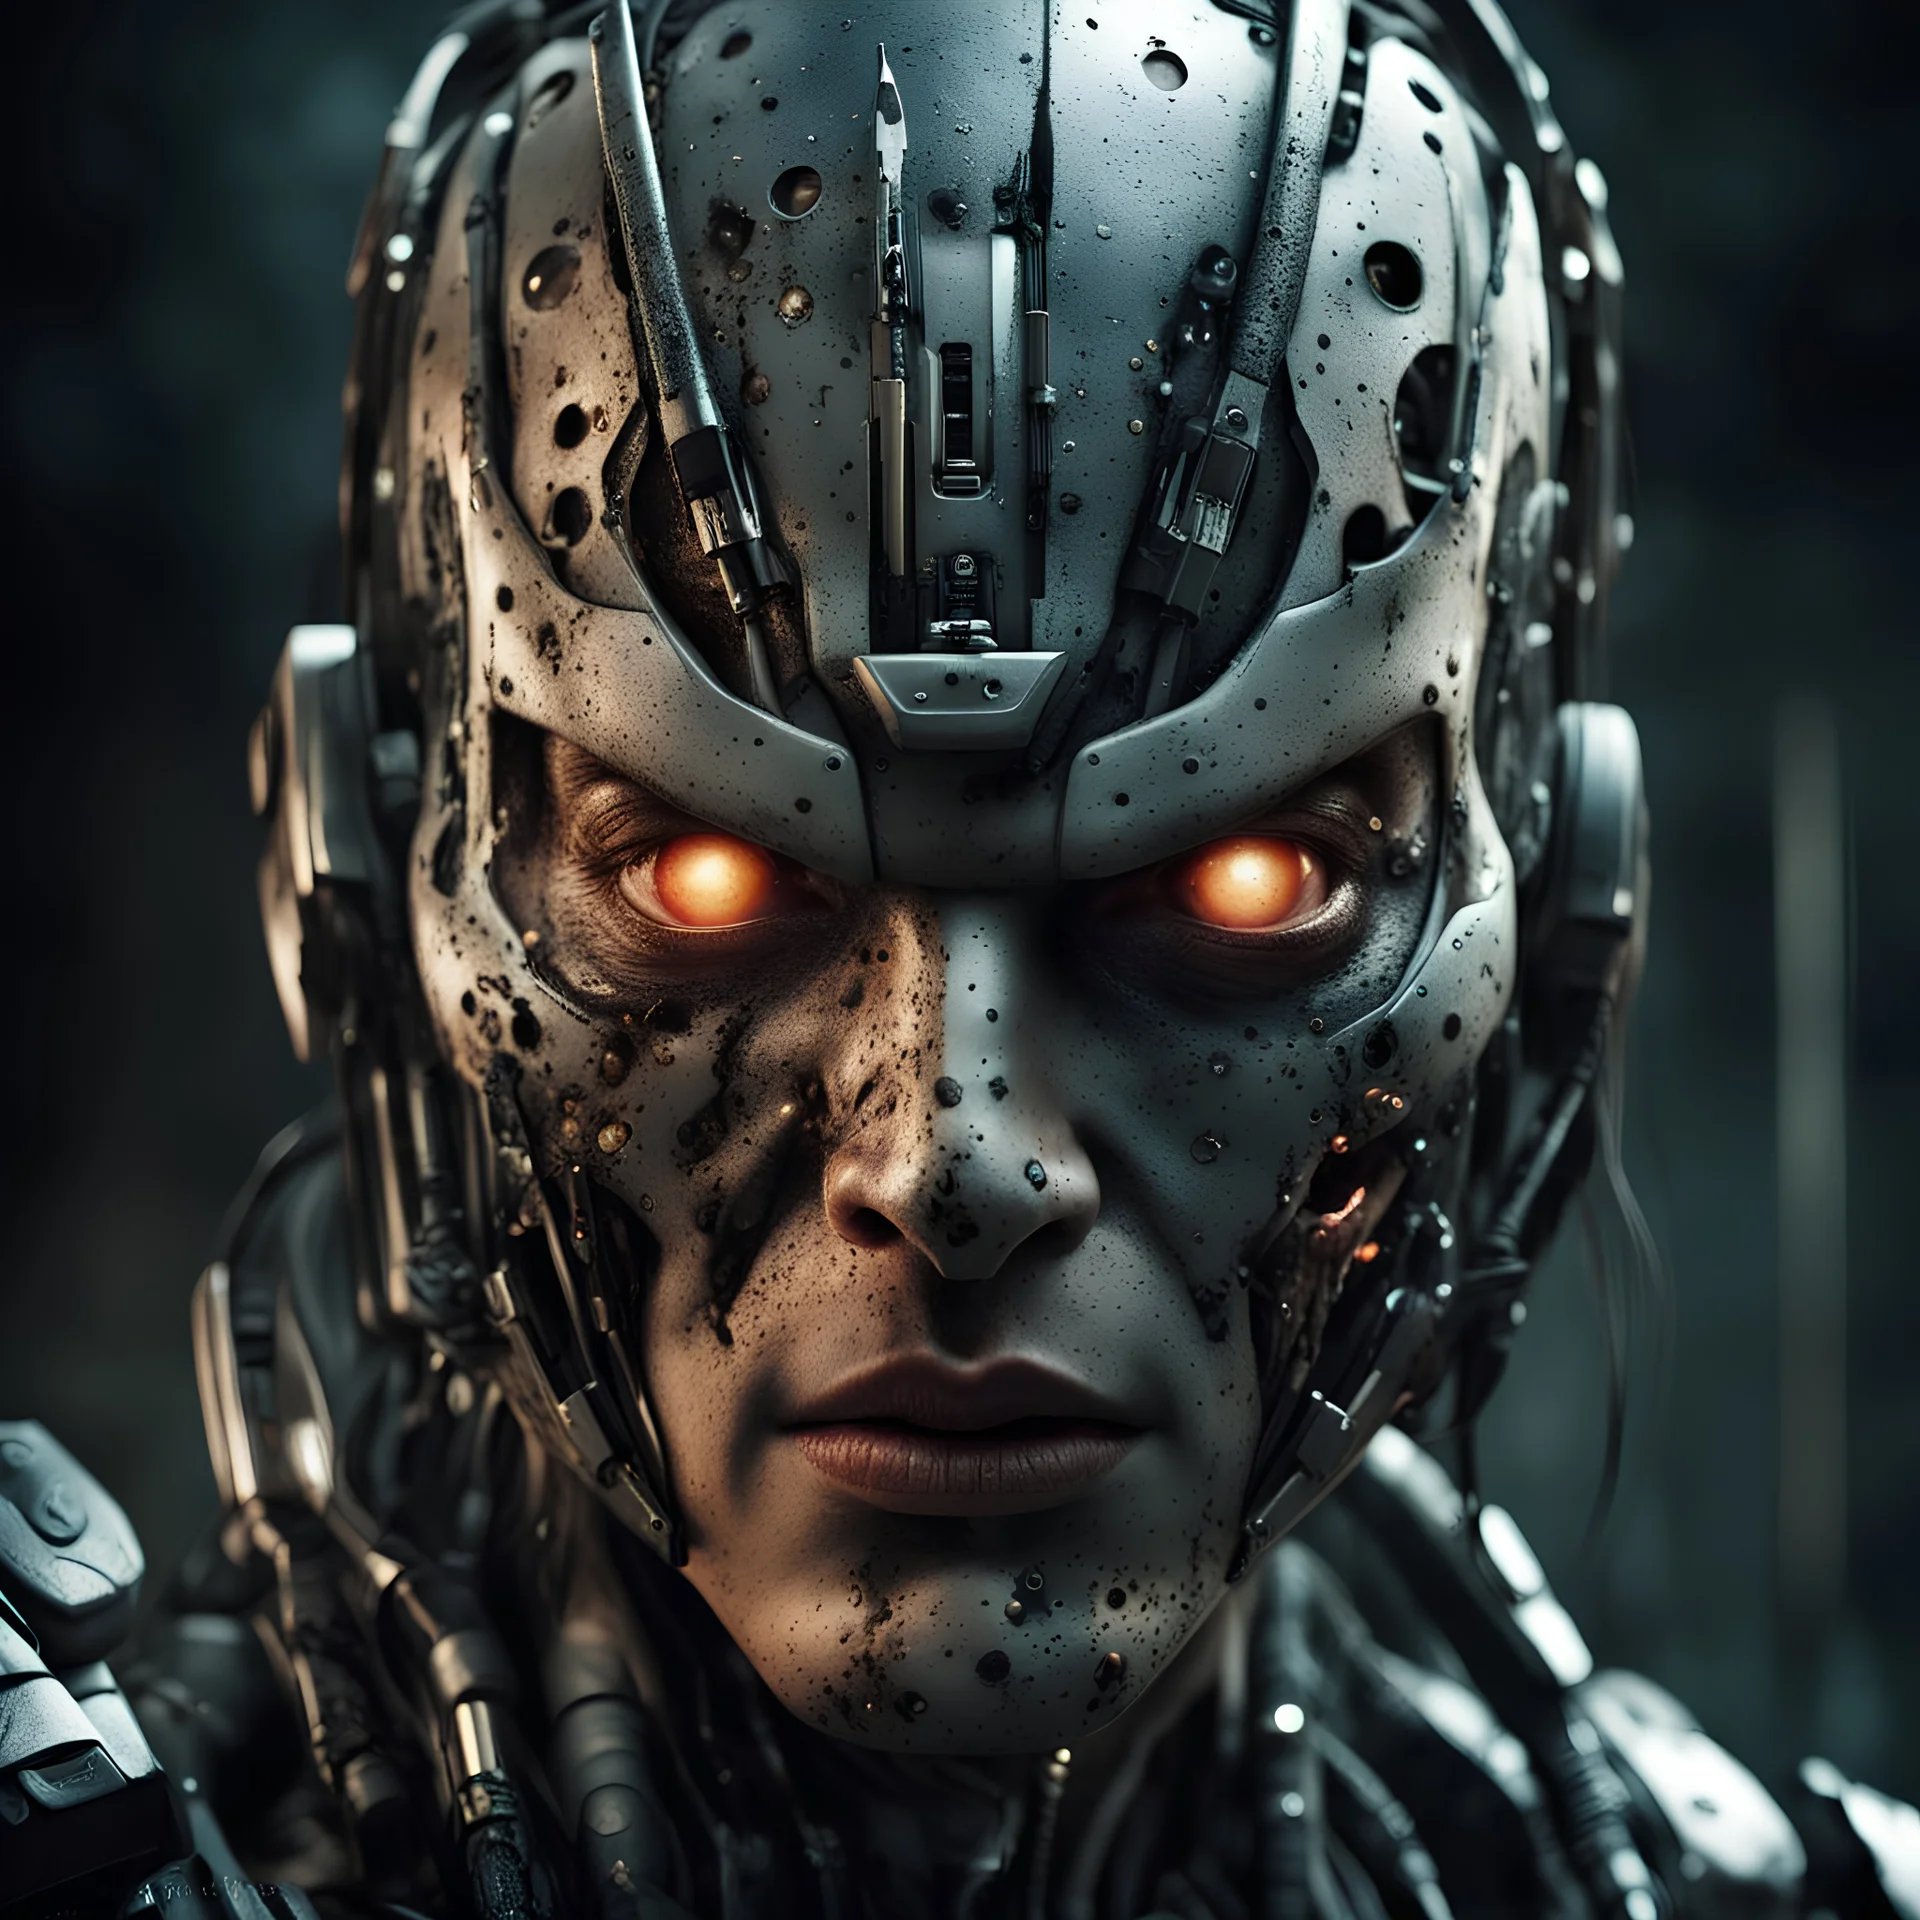 a close up portrait of an evil combat cyborg. photorealistic. predator meets the matrix meets the Borg. the lighting should be dark. it's approaching you from the shadows. it's battle damaged. some burn marks and bullet holes. incredibly ominous. one eye is a targetting device.